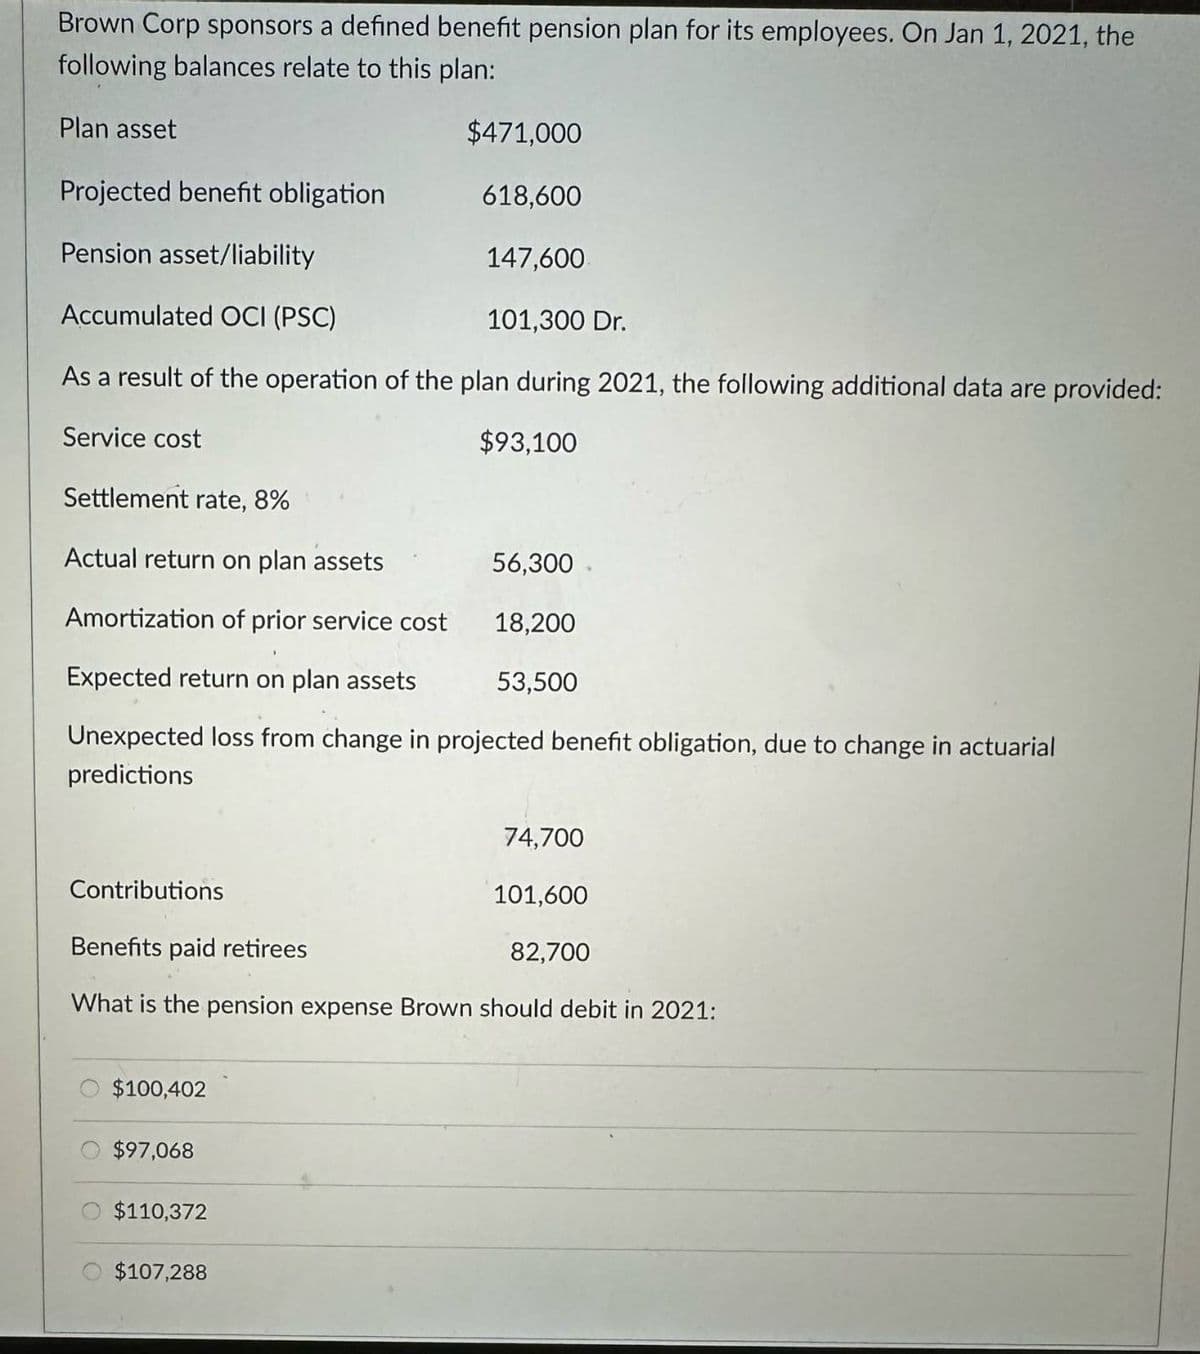 Brown Corp sponsors a defined benefit pension plan for its employees. On Jan 1, 2021, the
following balances relate to this plan:
Plan asset
$471,000
Projected benefit obligation
618,600
Pension asset/liability
147,600
Accumulated OCI (PSC)
101,300 Dr.
As a result of the operation of the plan during 2021, the following additional data are provided:
Service cost
Settlement rate, 8%
$93,100
Actual return on plan assets
56,300
Amortization of prior service cost
18,200
Expected return on plan assets
53,500
Unexpected loss from change in projected benefit obligation, due to change in actuarial
predictions
Contributions
Benefits paid retirees
74,700
101,600
82,700
What is the pension expense Brown should debit in 2021:
$100,402
$97,068
$110,372
$107,288